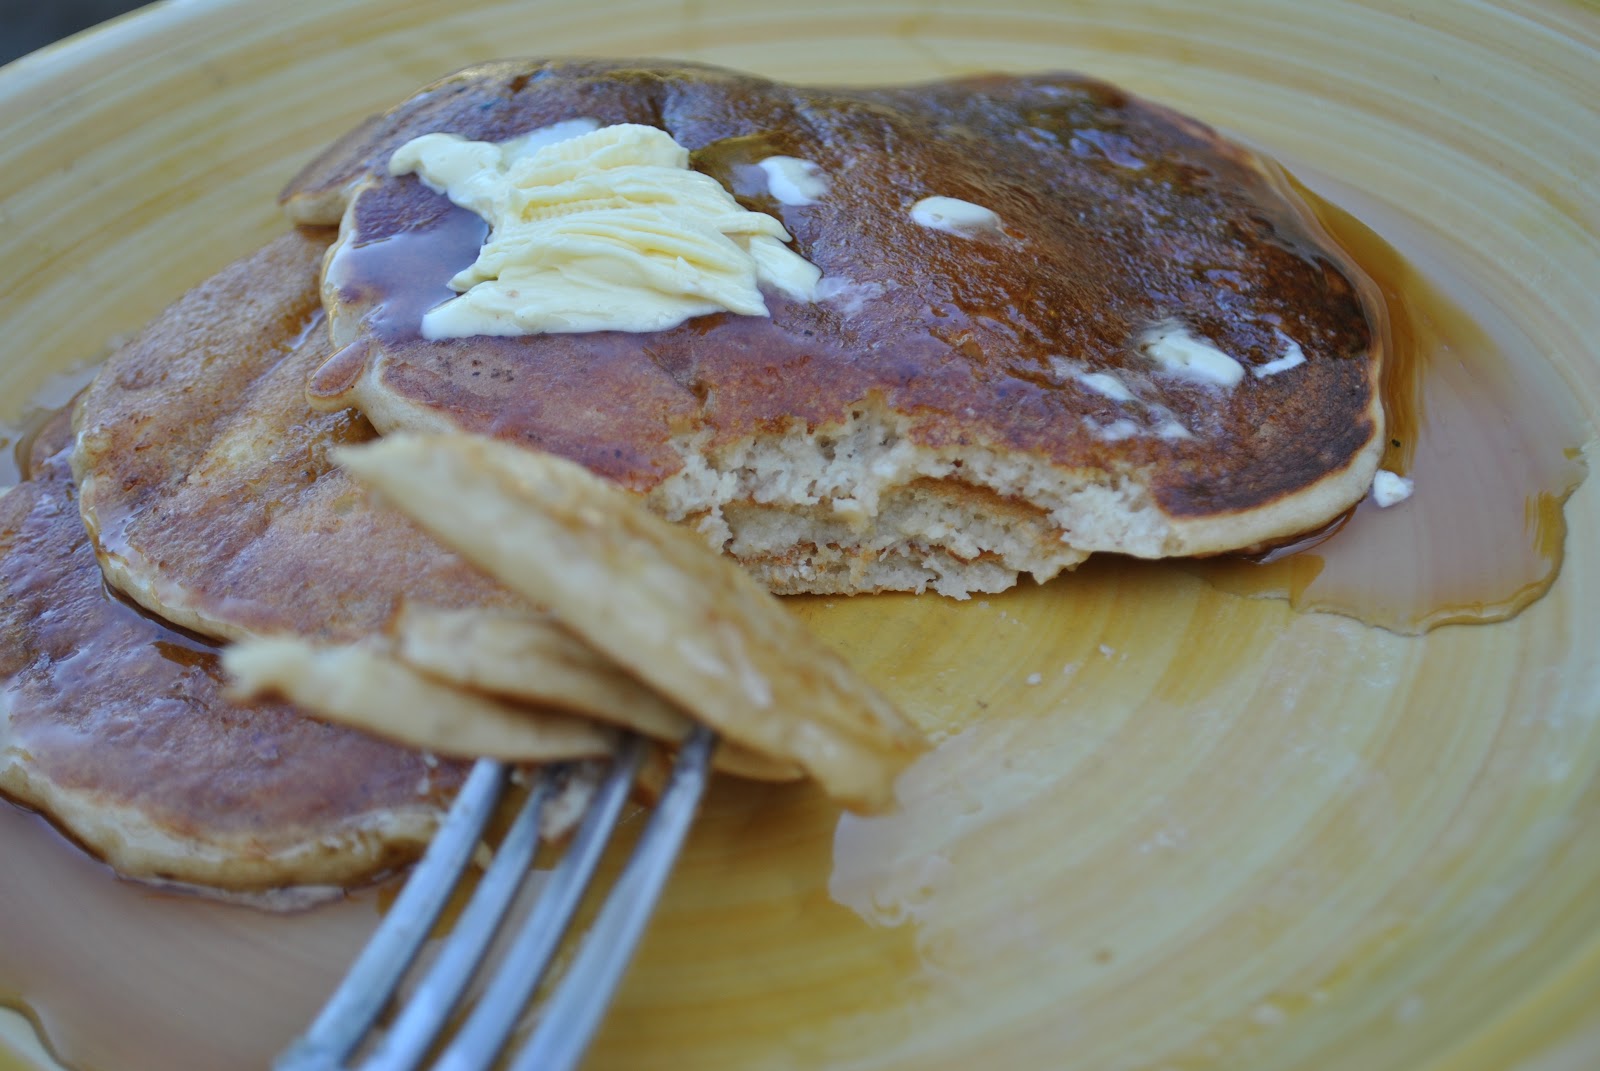 make  in found recipe whole pancakes how grain grain mix wheat flour whole homemade to with pancake whole homemade